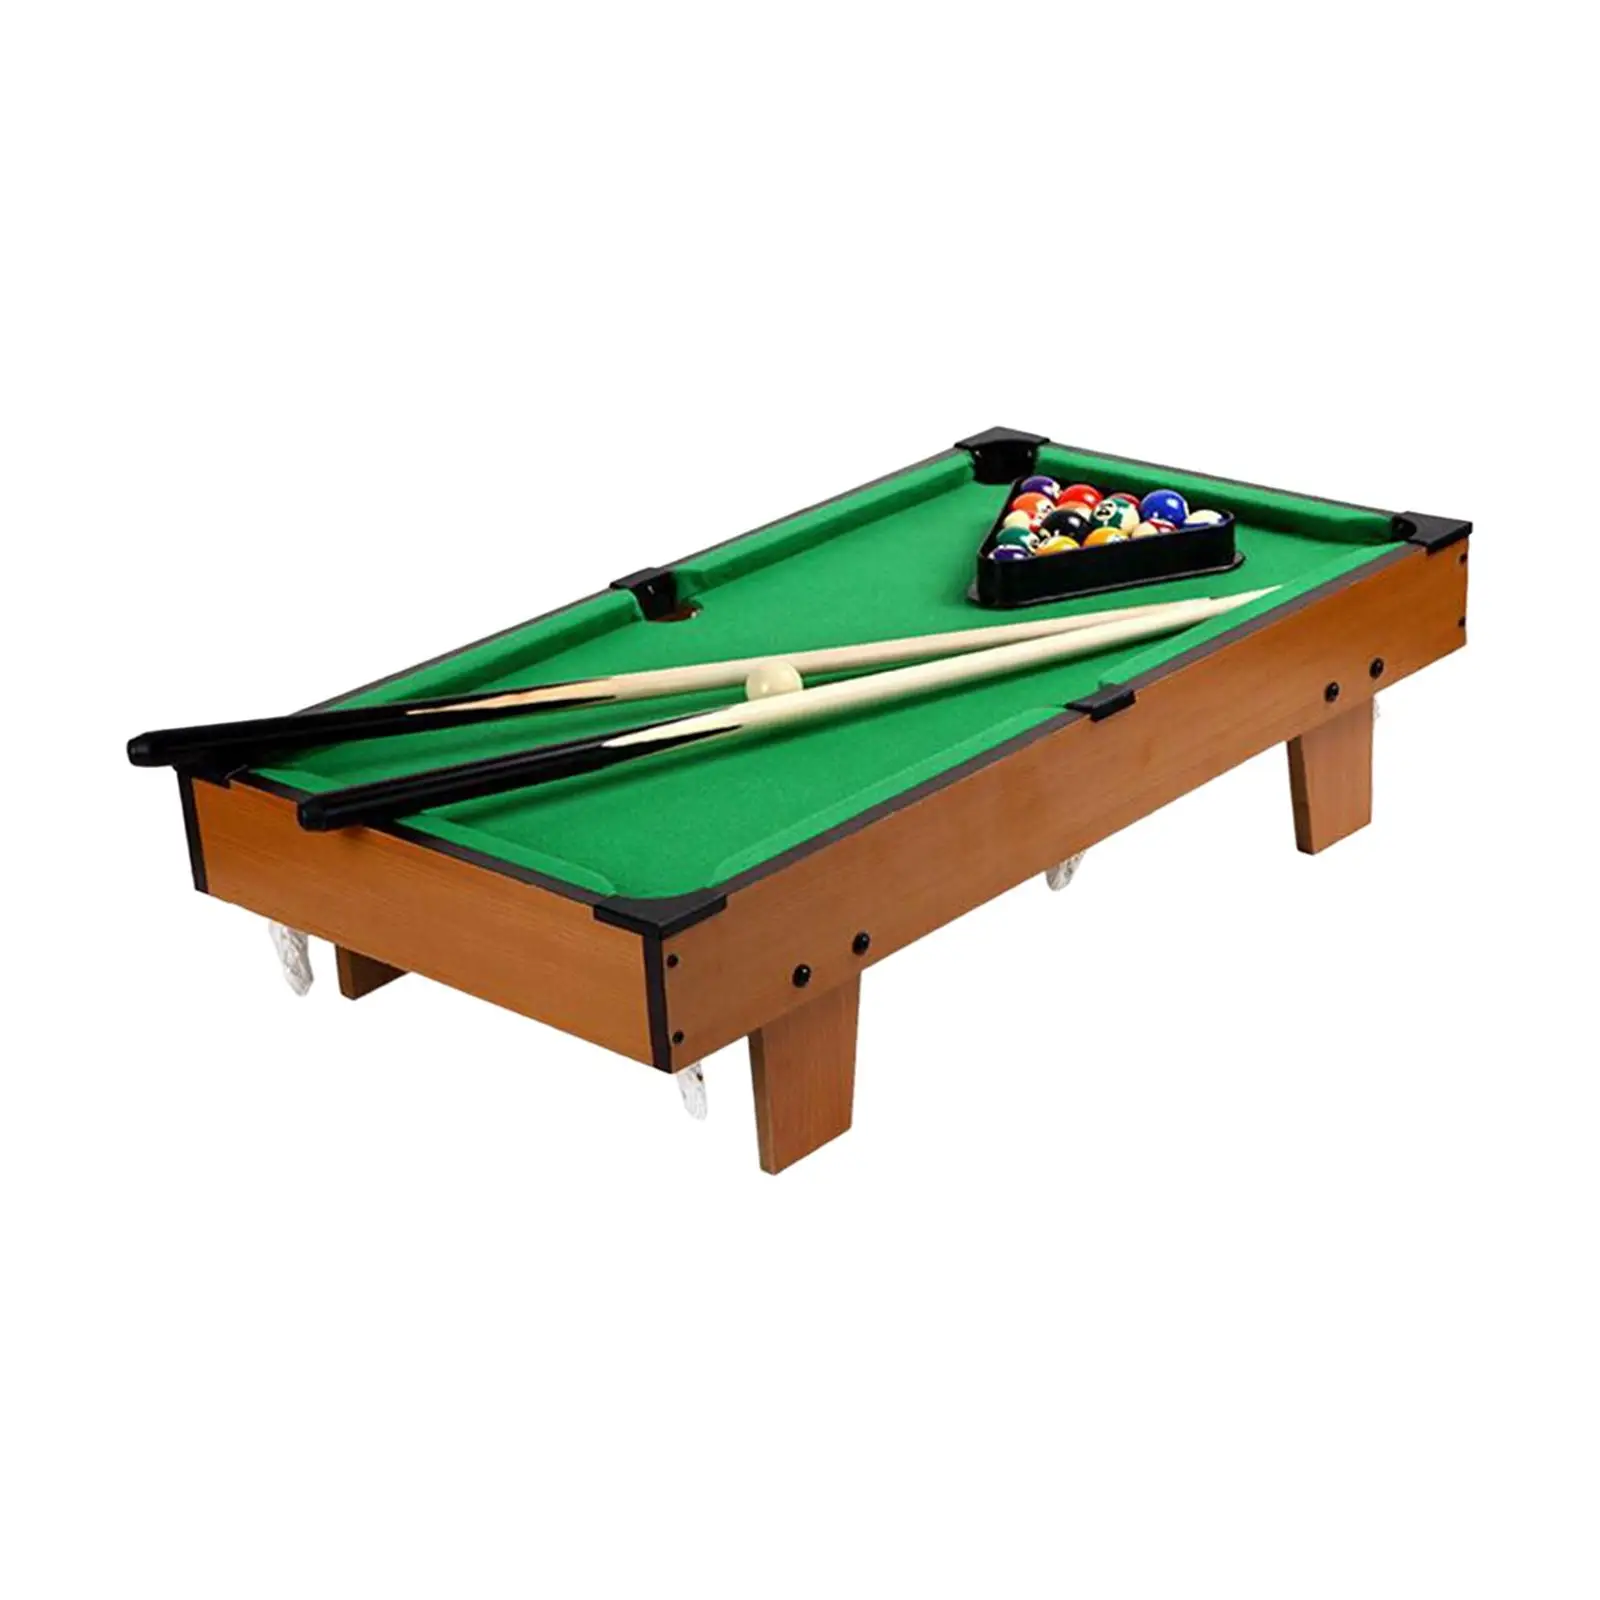 Pool Table Set Game Toy Chalk, Triangle Board Games Billiard